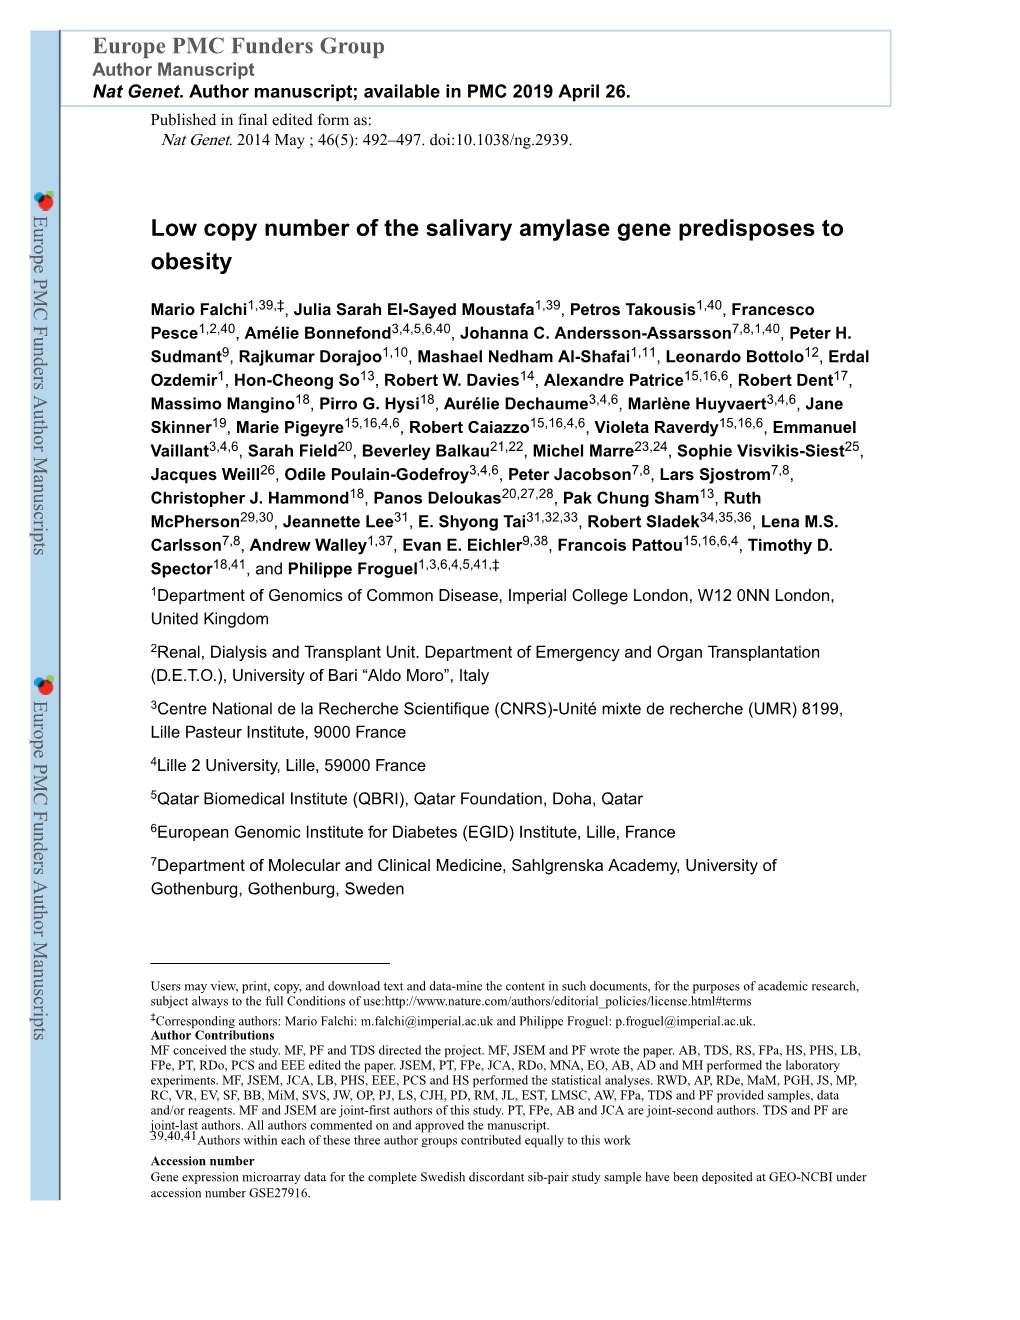 Low Copy Number of the Salivary Amylase Gene Predisposes to Obesity